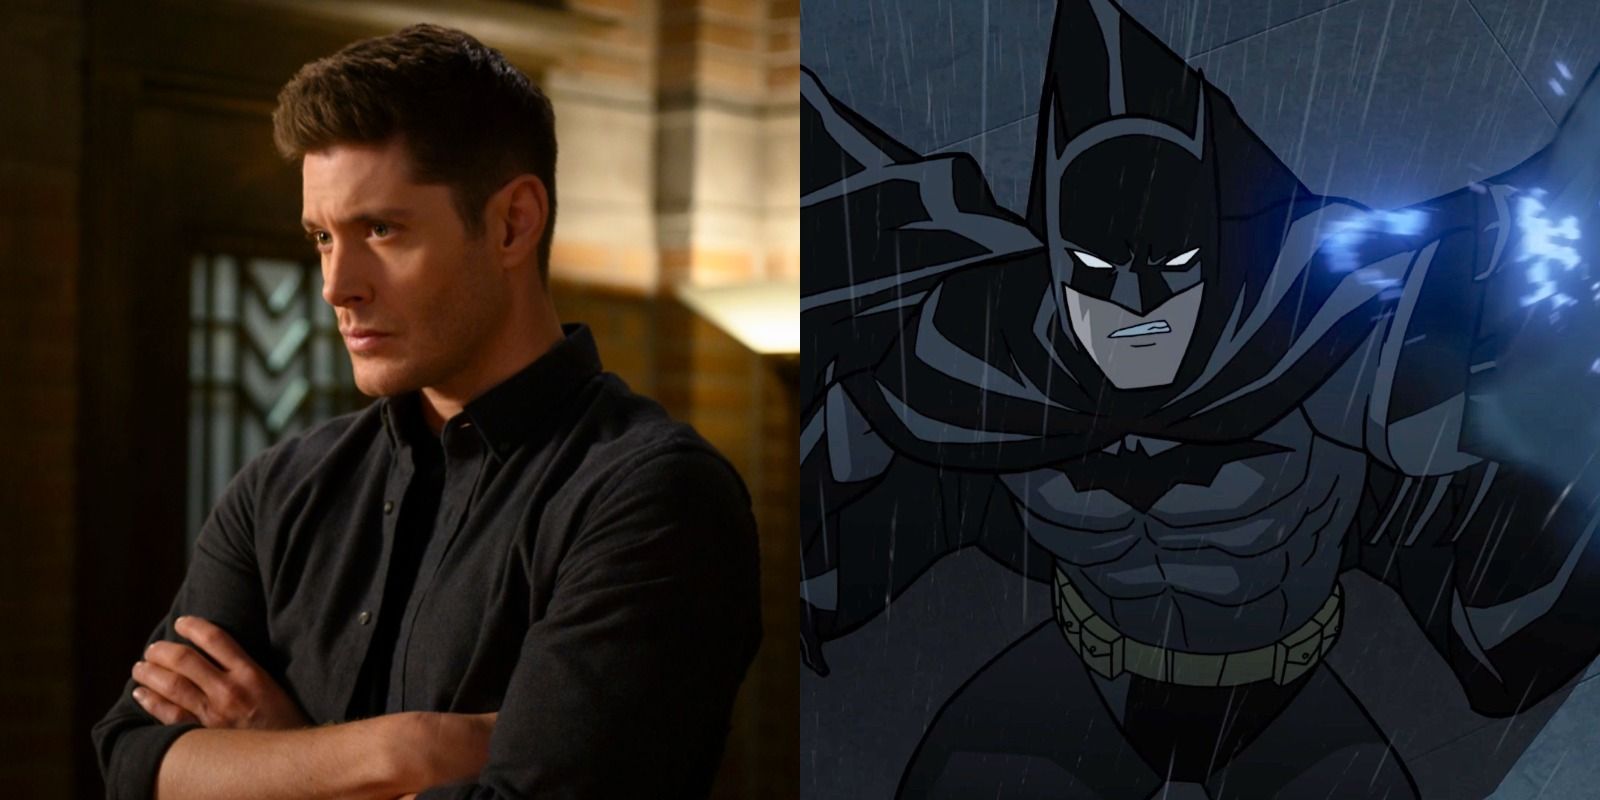 Jensen Ackles in Supernatural and his version of Batman in The Long Halloween, Part One